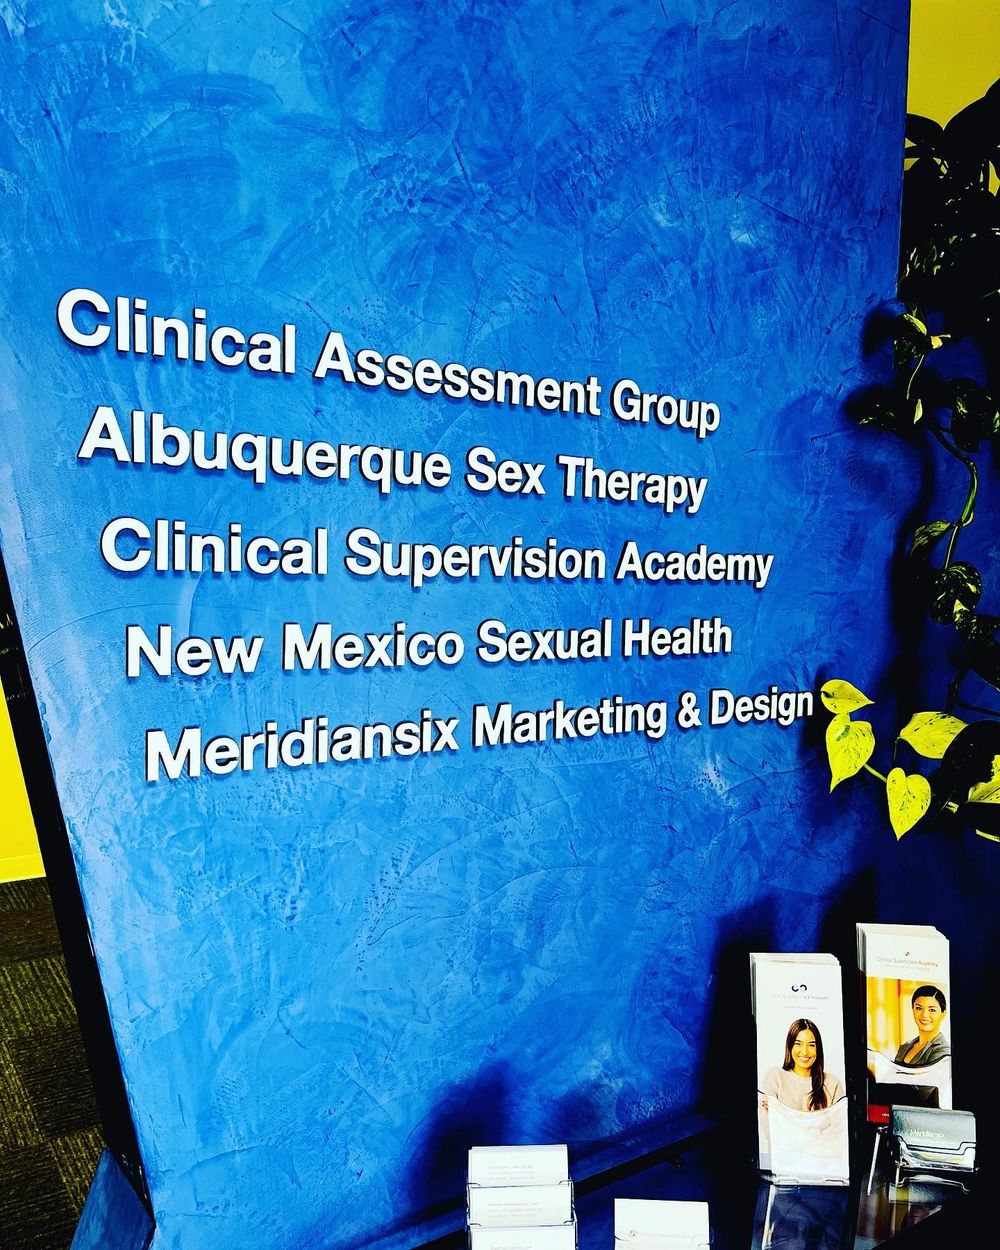 Albuquerque Sex Therapy and Clinical Assessment Group Sign